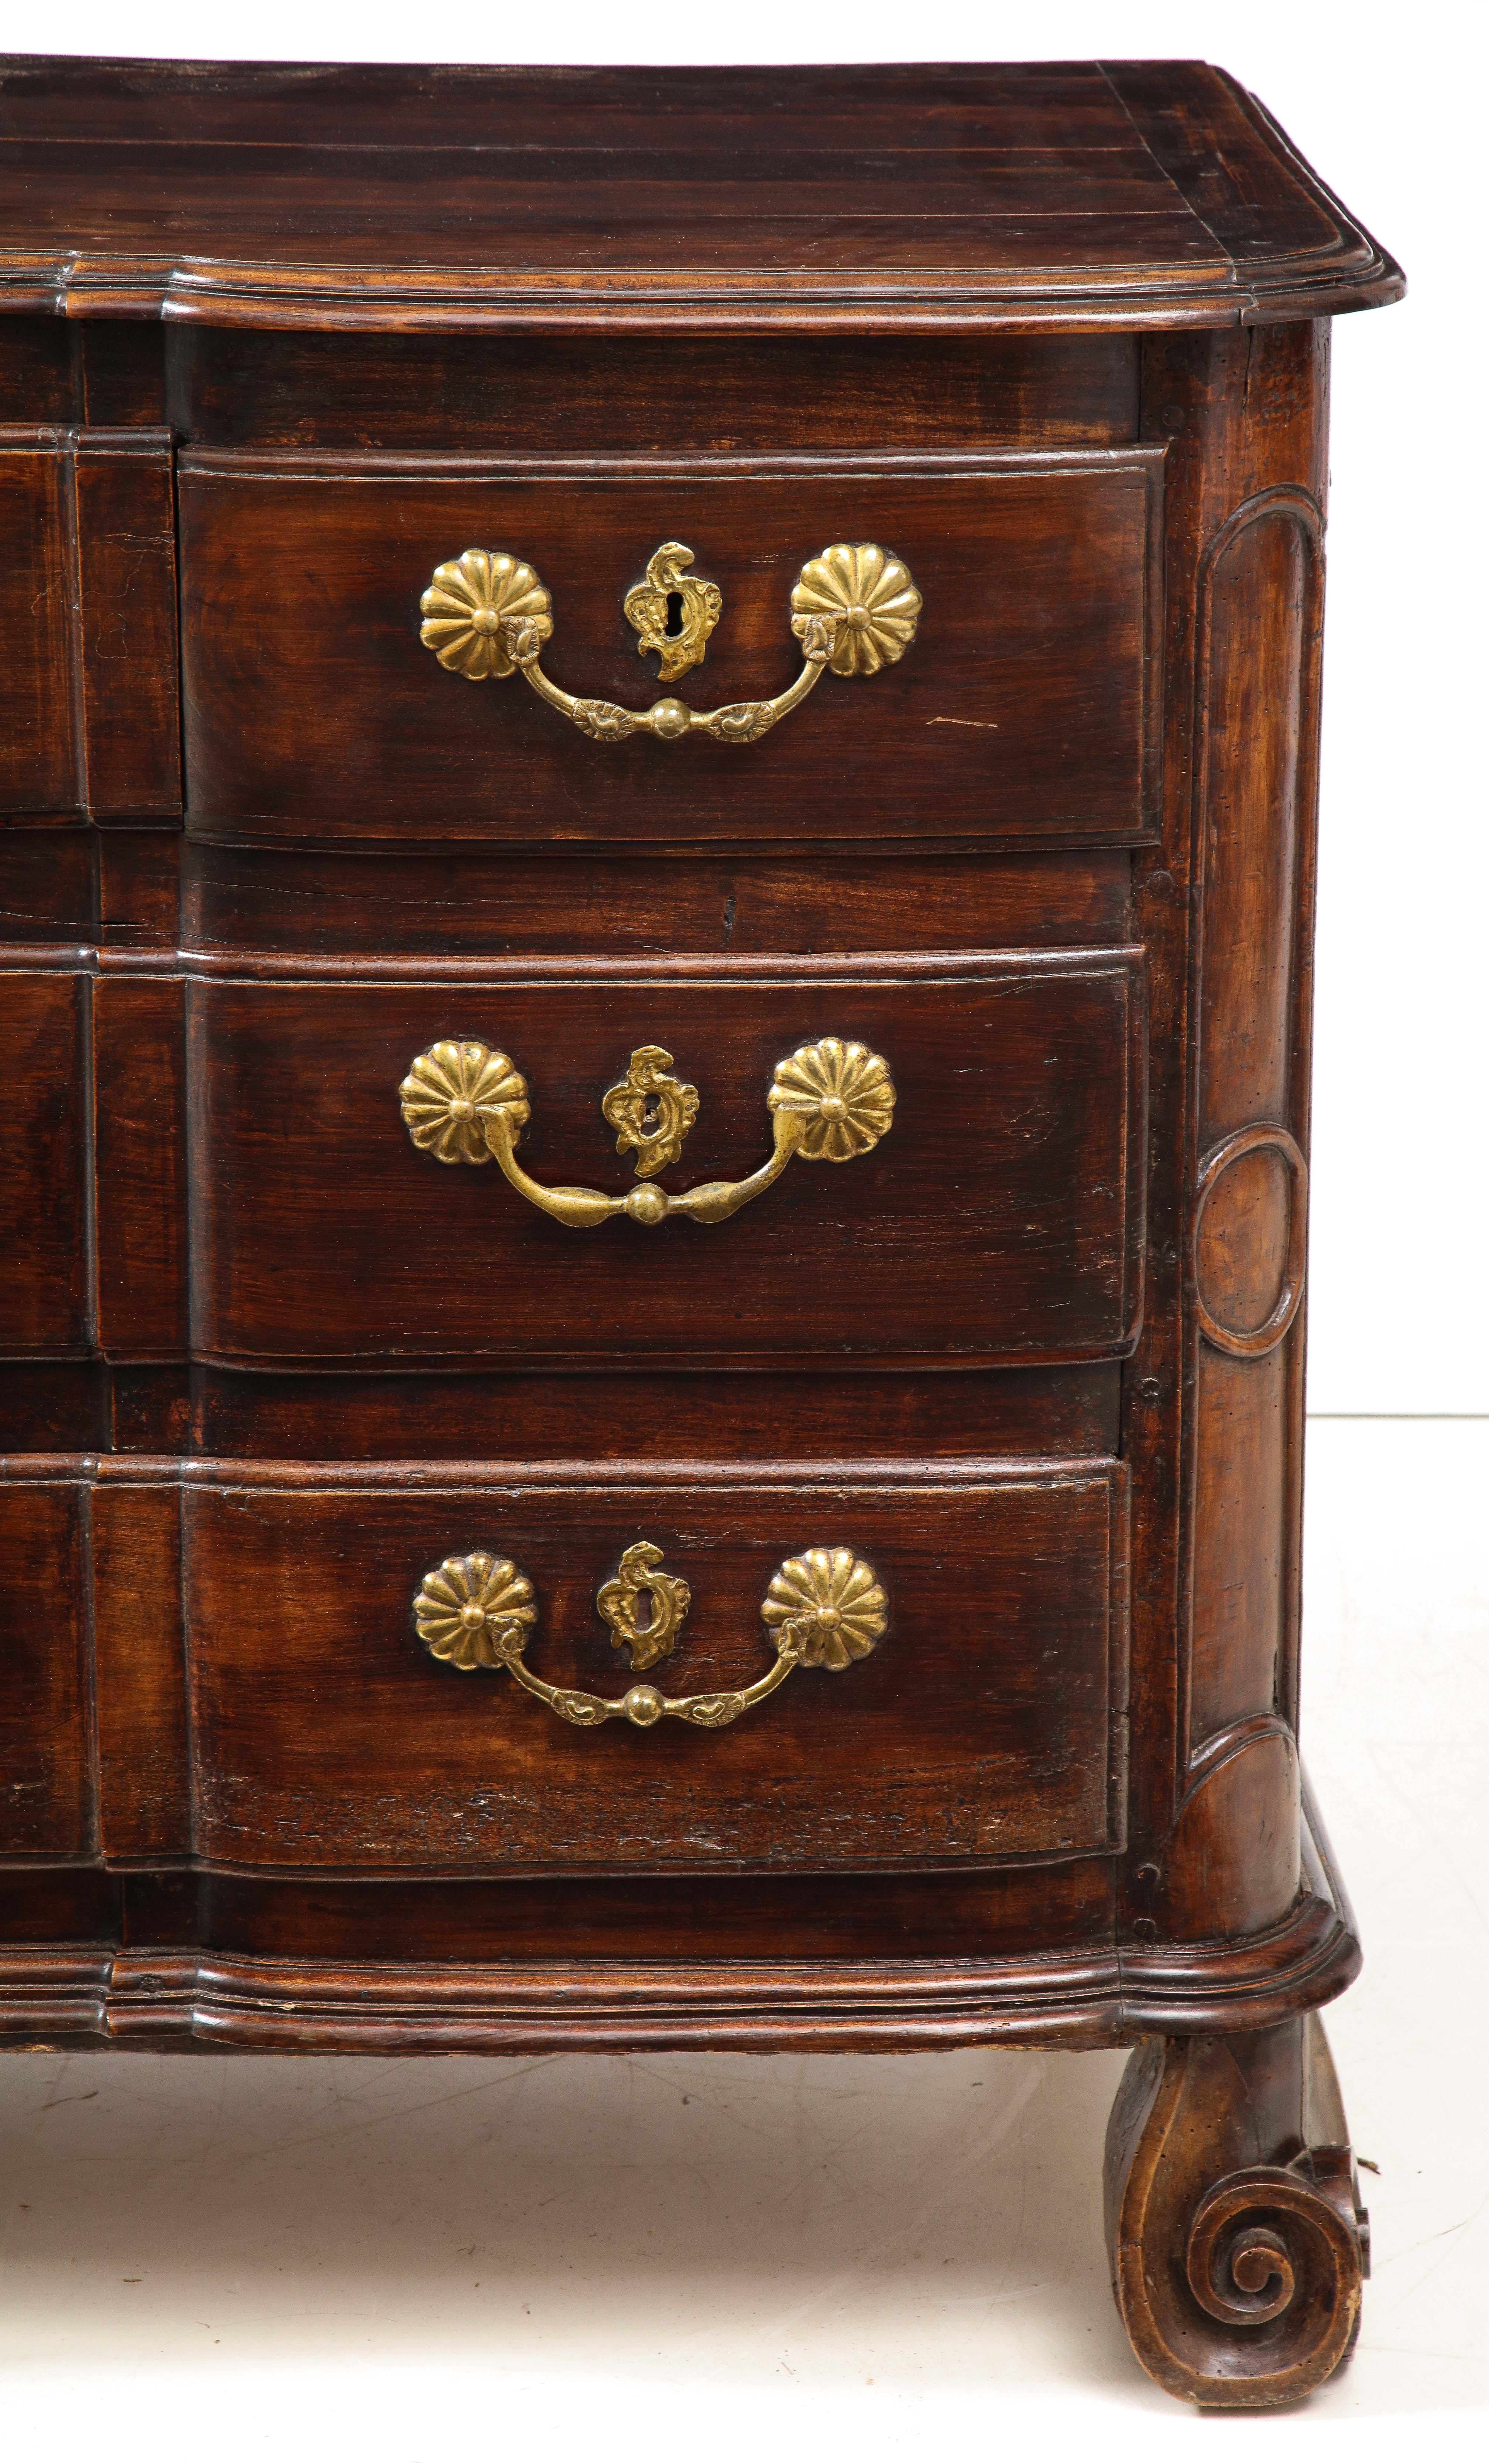 This large 19th century piece will add character and personality to a room. In a wonderfully rich dark oak, this chest is raised on escargot feet and features three drawers with original beautiful brass hardware.

Measures: Height 39 x length 56 x